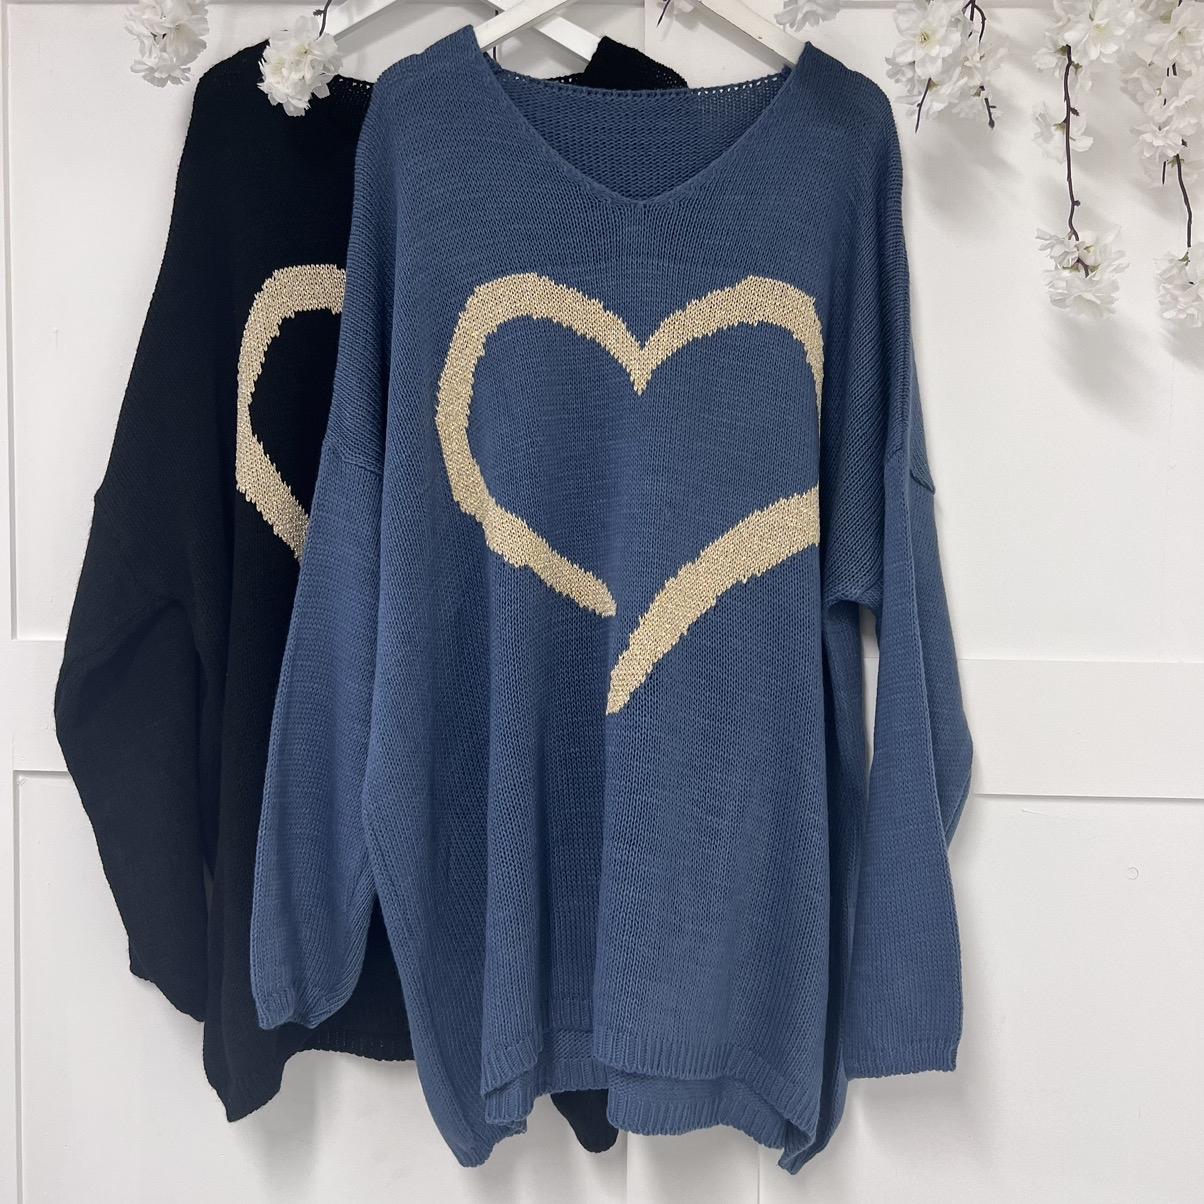 Cora: Long oversized knitted heart top. One size 14-26